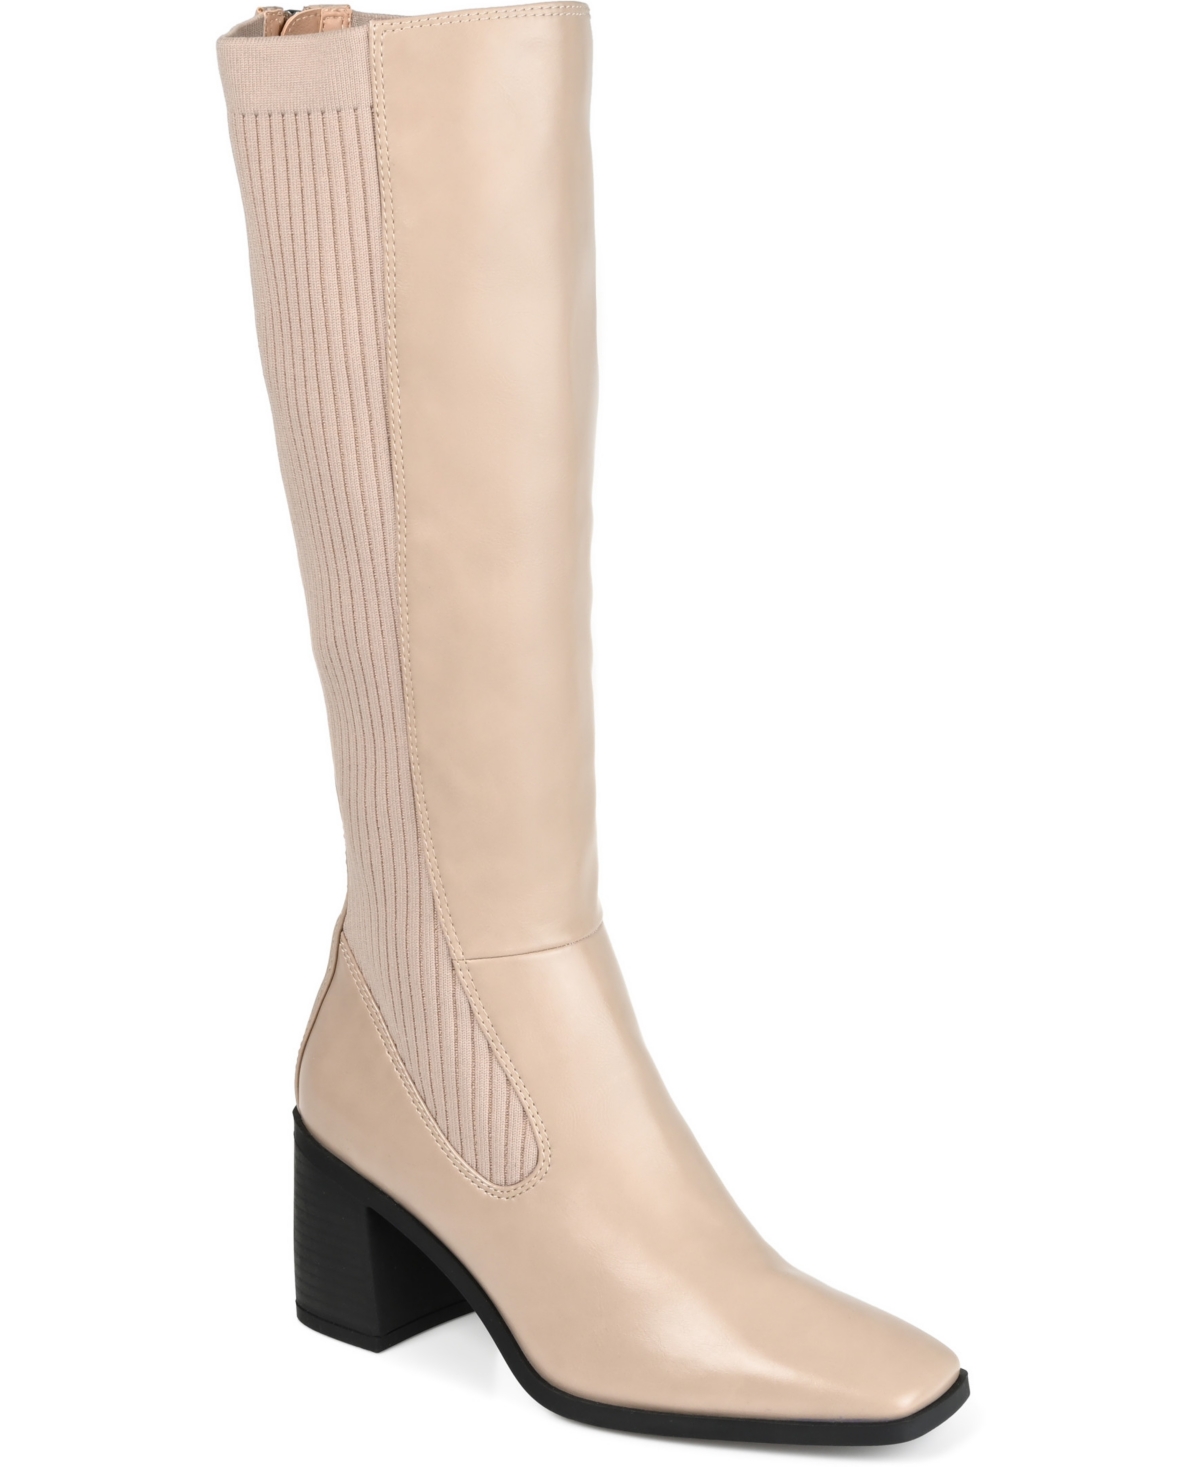 Women's Winny Extra Wide Calf Boots - Taupe